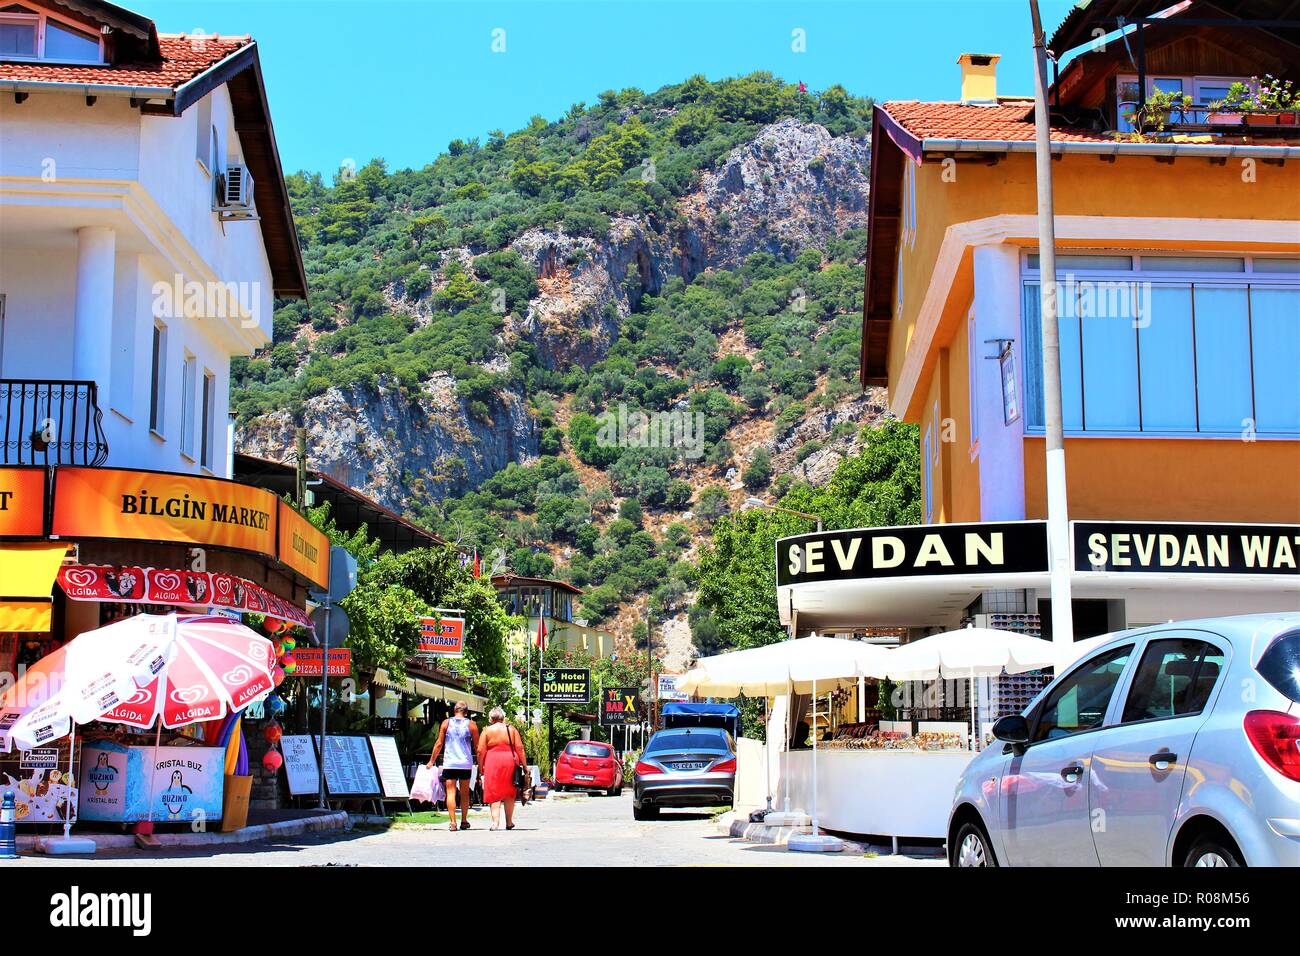 Dalyan, Turkey - July 7th 2018: Street view in Dalyan town, Turkey, with mountain view in the background. Stock Photo